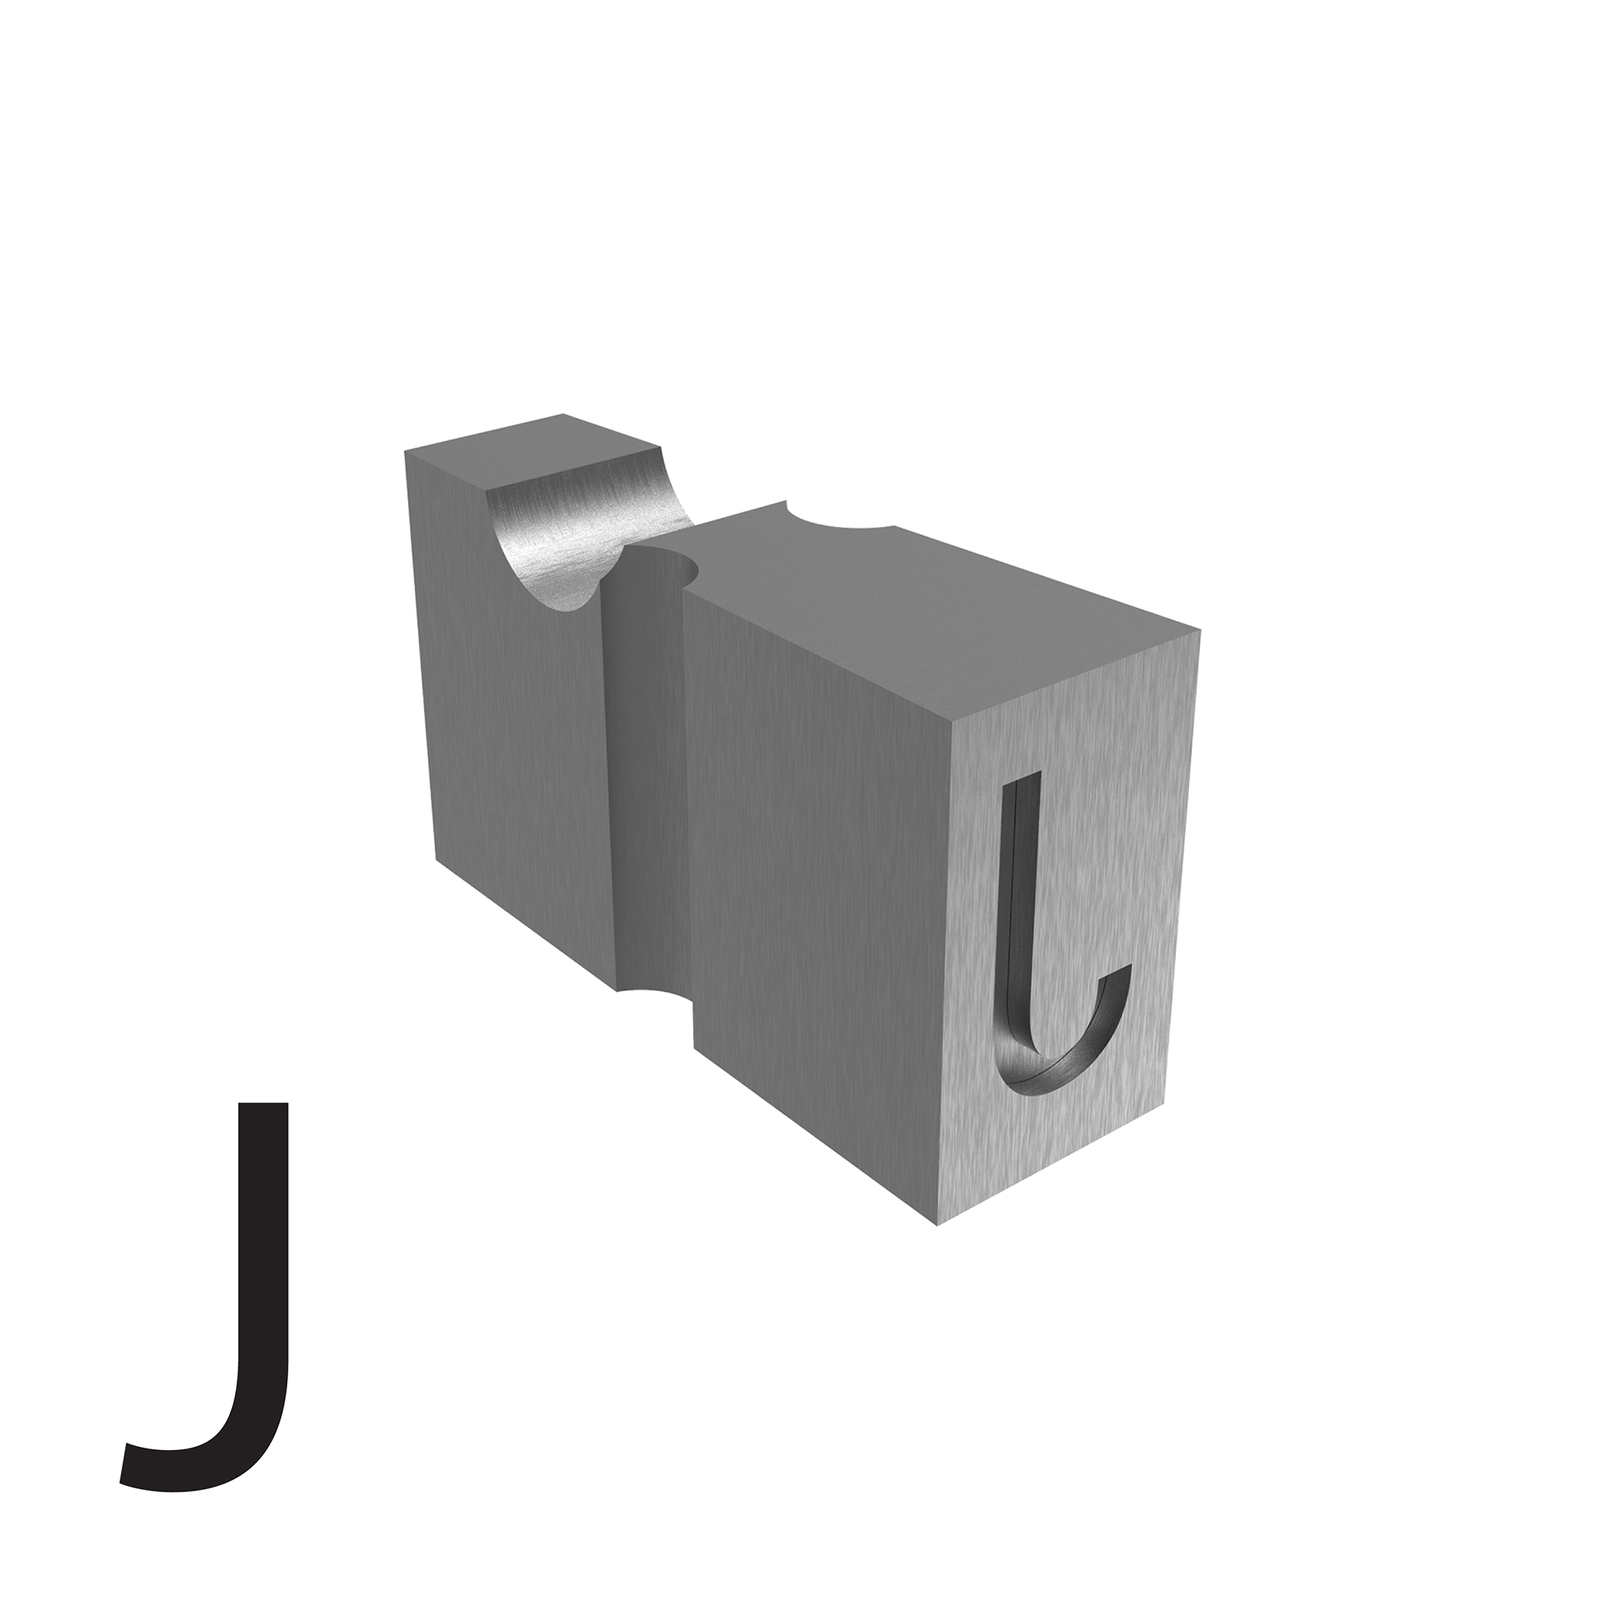 4.9mm letter J type used for embossed printing 